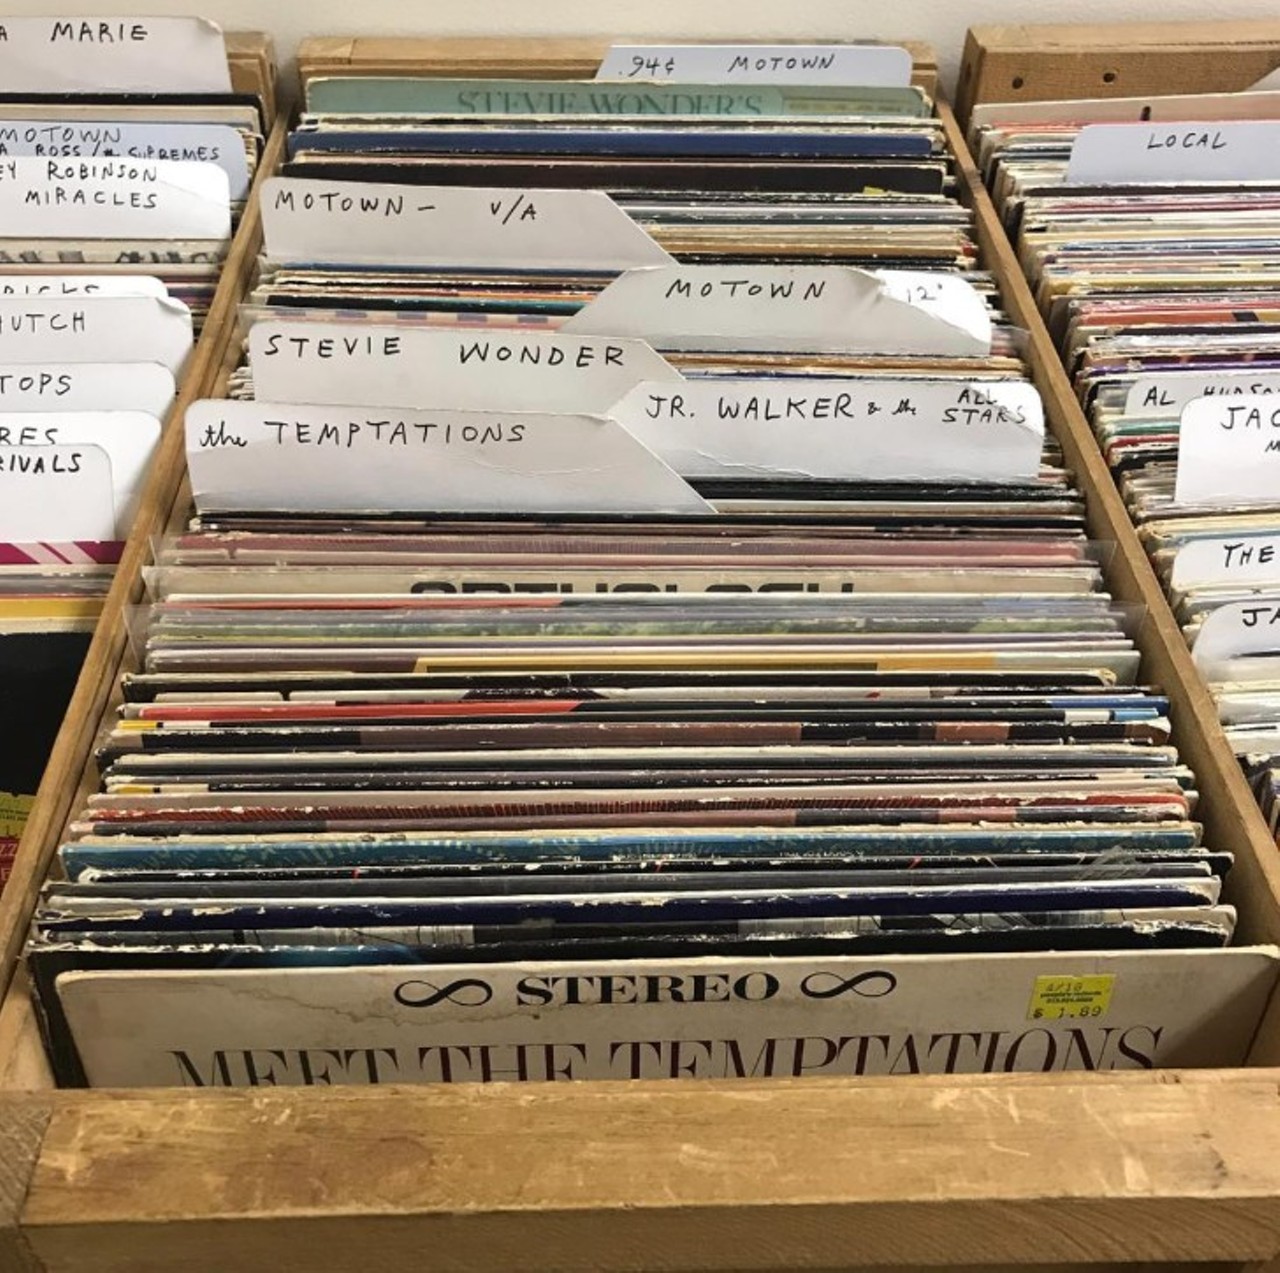 People&#146;s Records
1464 Gratiot Ave, Detroit, MI 48207
Go crate digging at one of Detroit&#146;s most notable record stores.
Photo with permission from @peoples_records